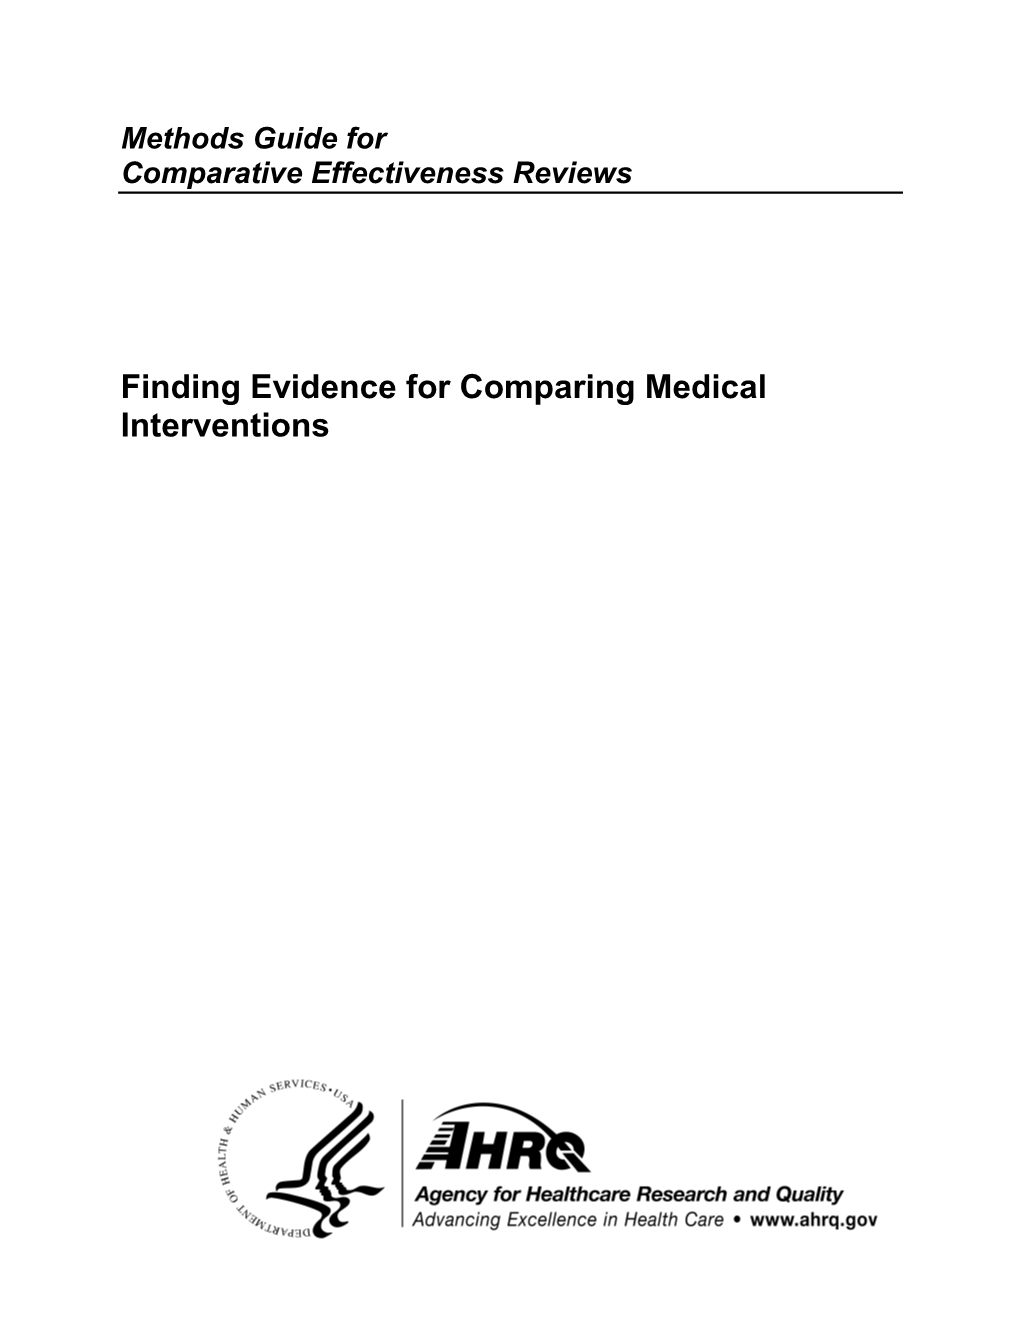 Finding Evidence for Comparing Medical Interventions